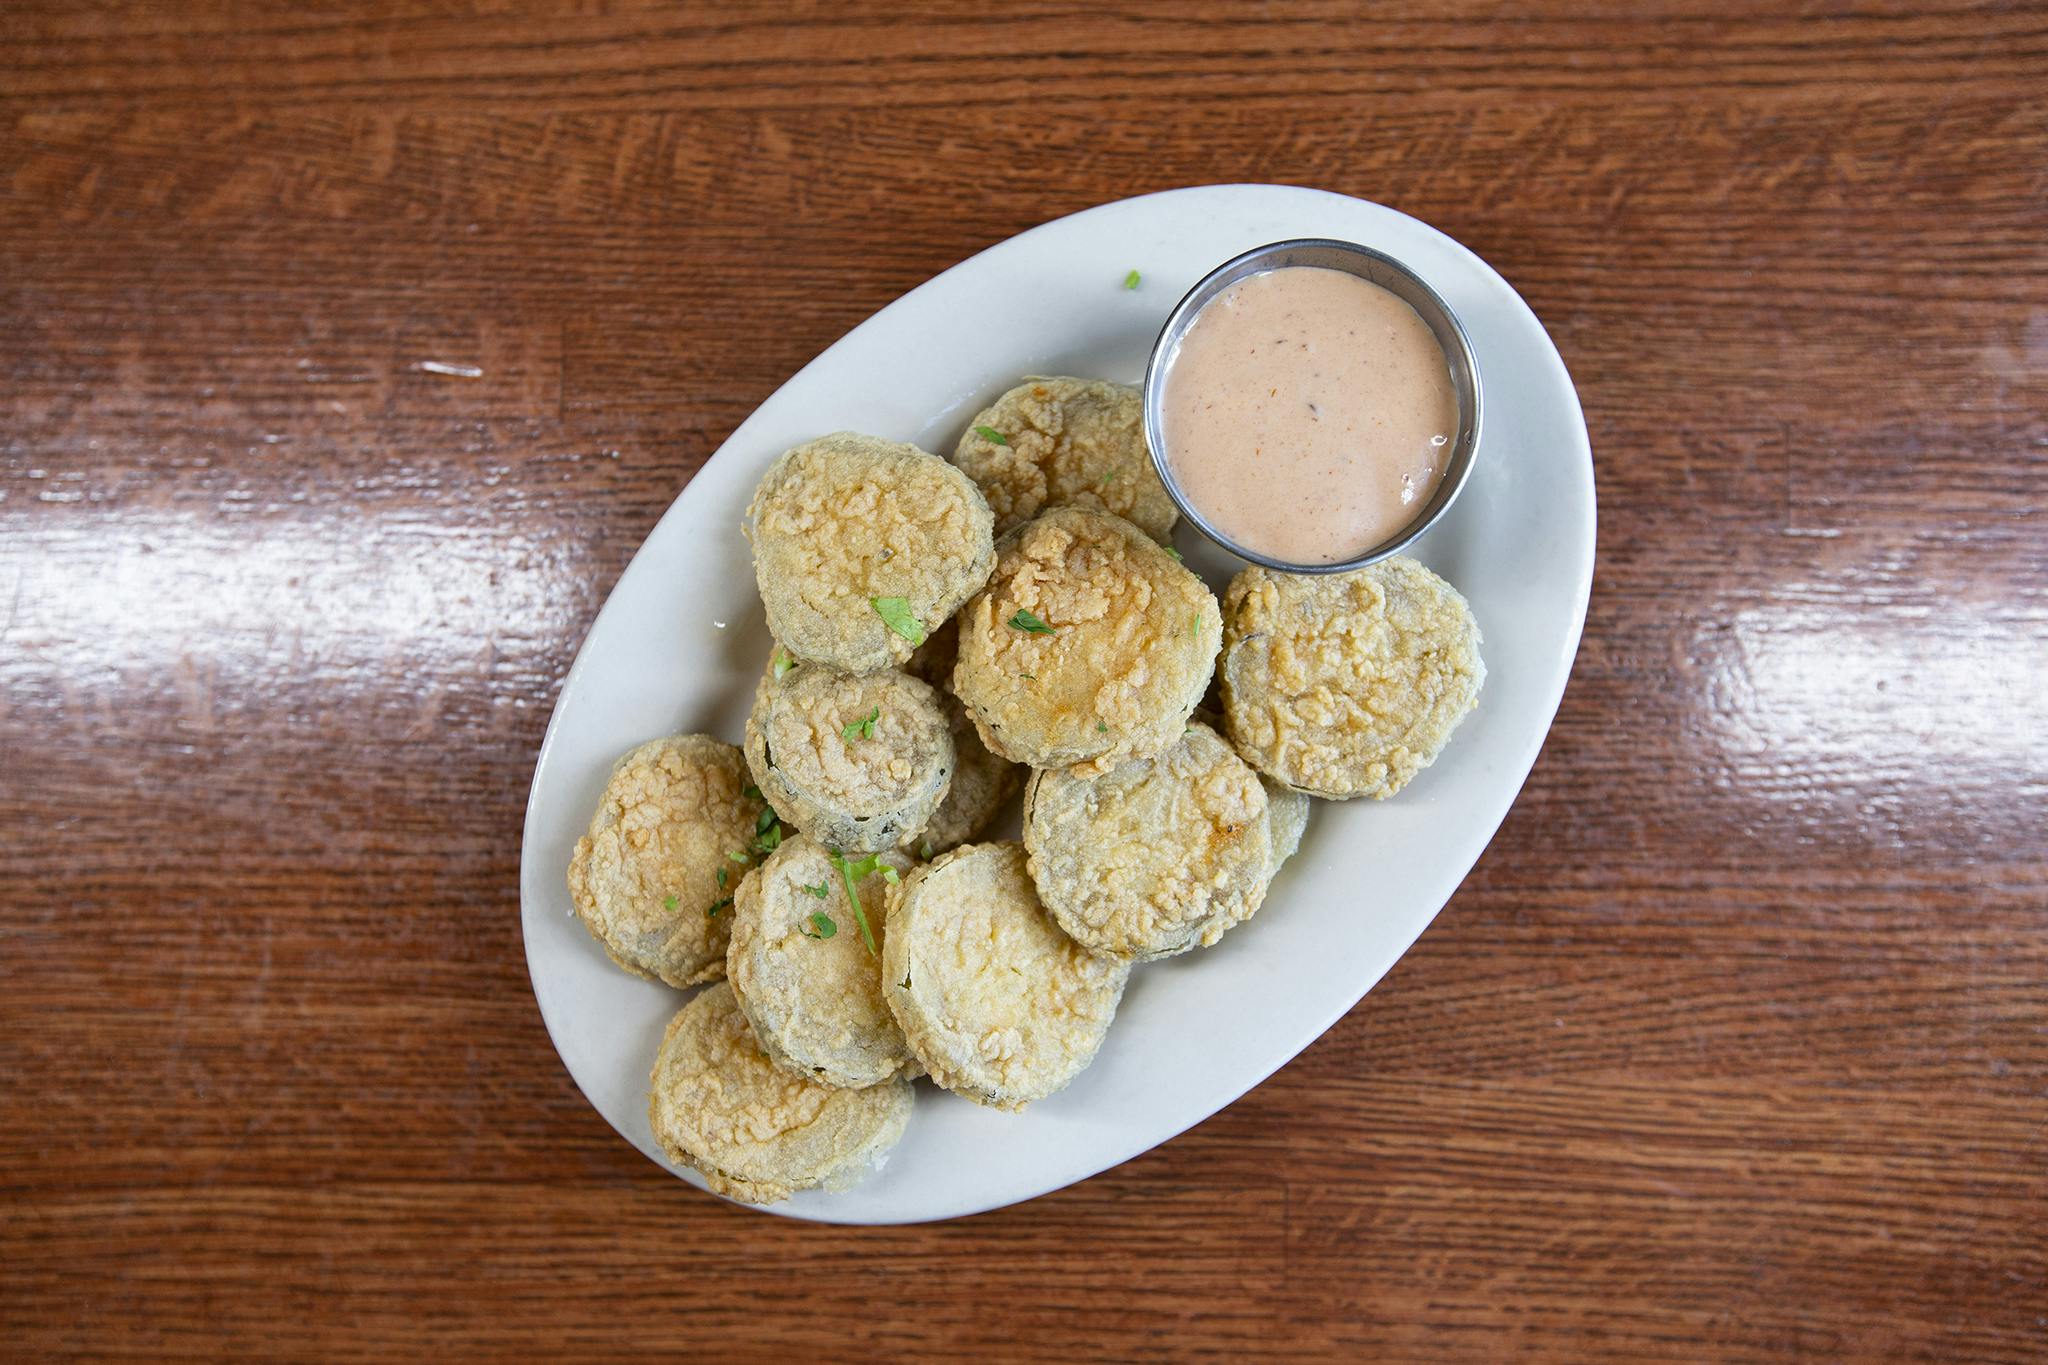 Southern Fried Pickles from Candlelite Chicago in Chicago, IL